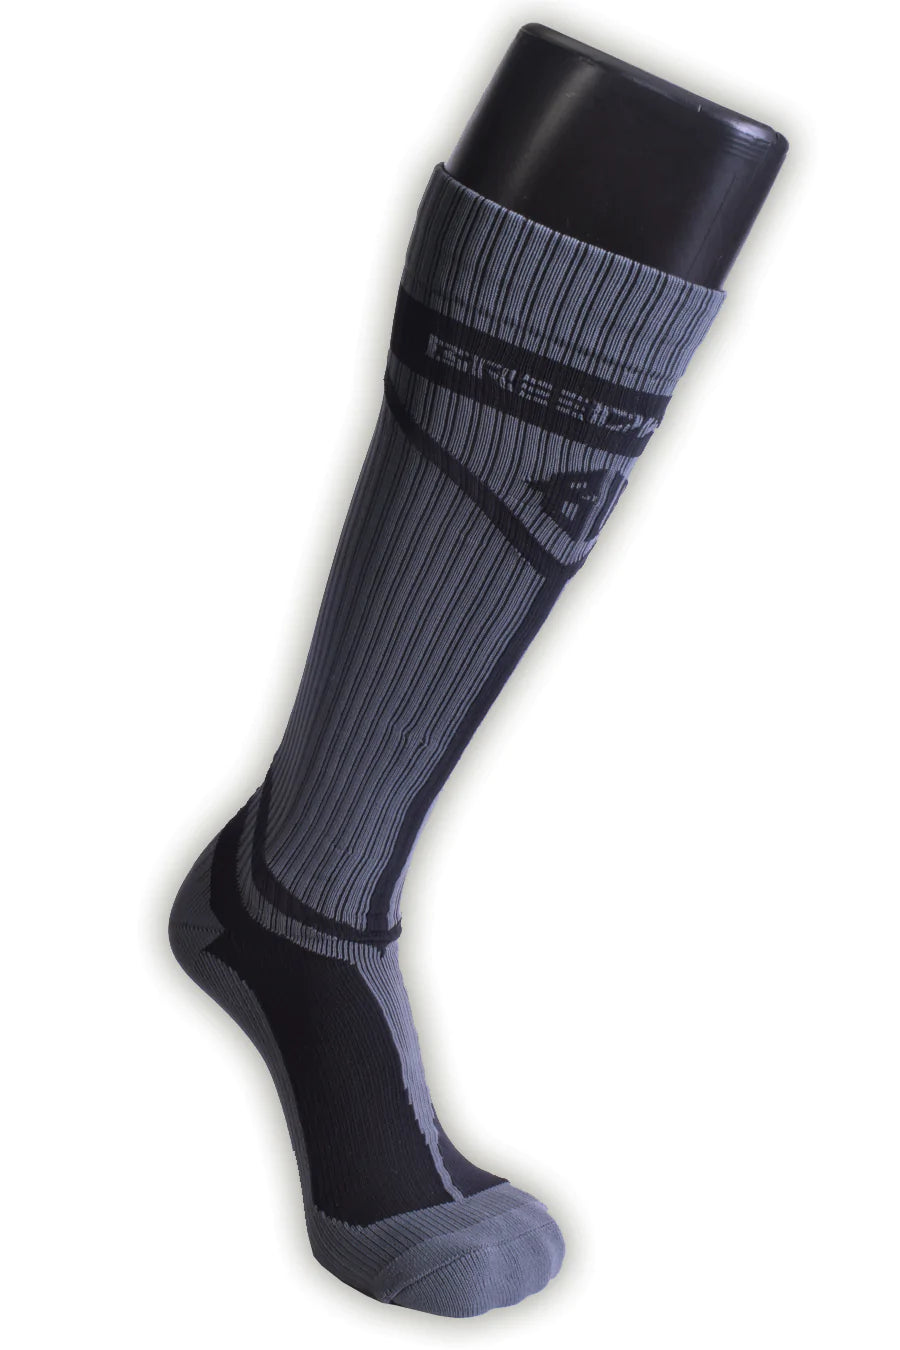 A mannequin leg wearing a grey Hybred Sock.